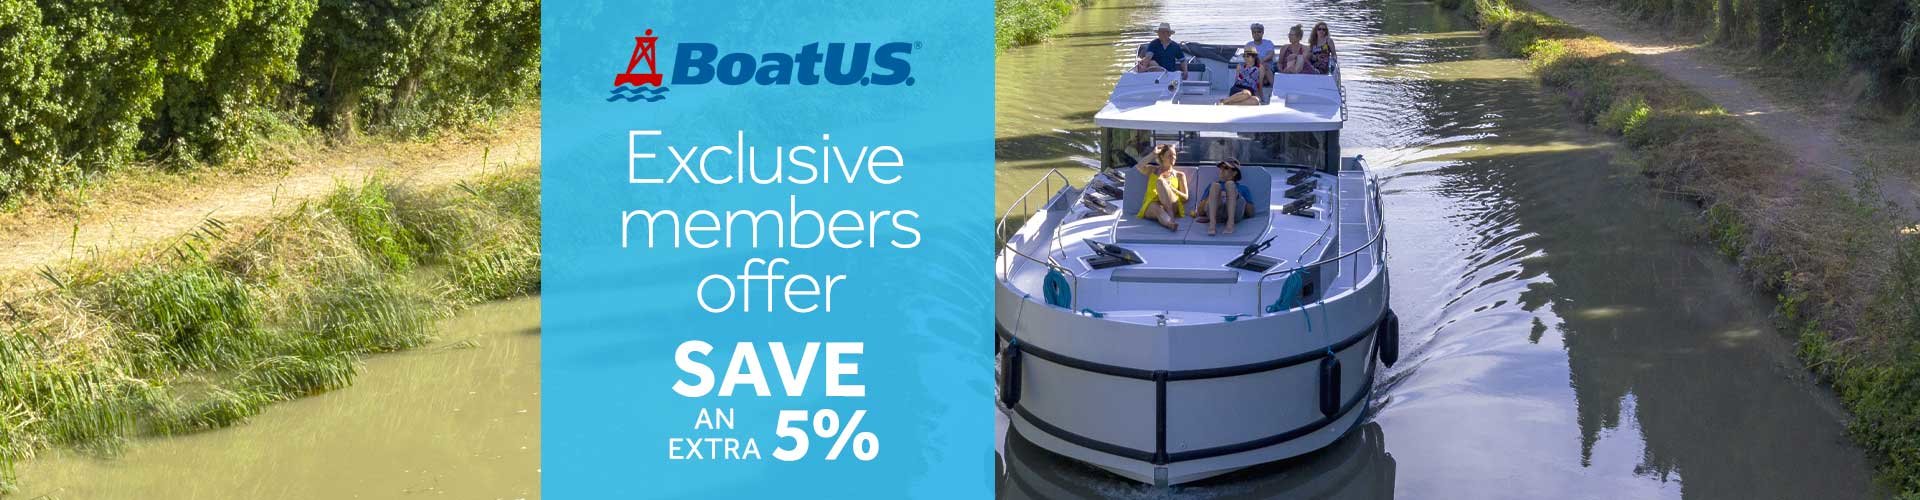 Le Boat - Boat US members save an extra 5%